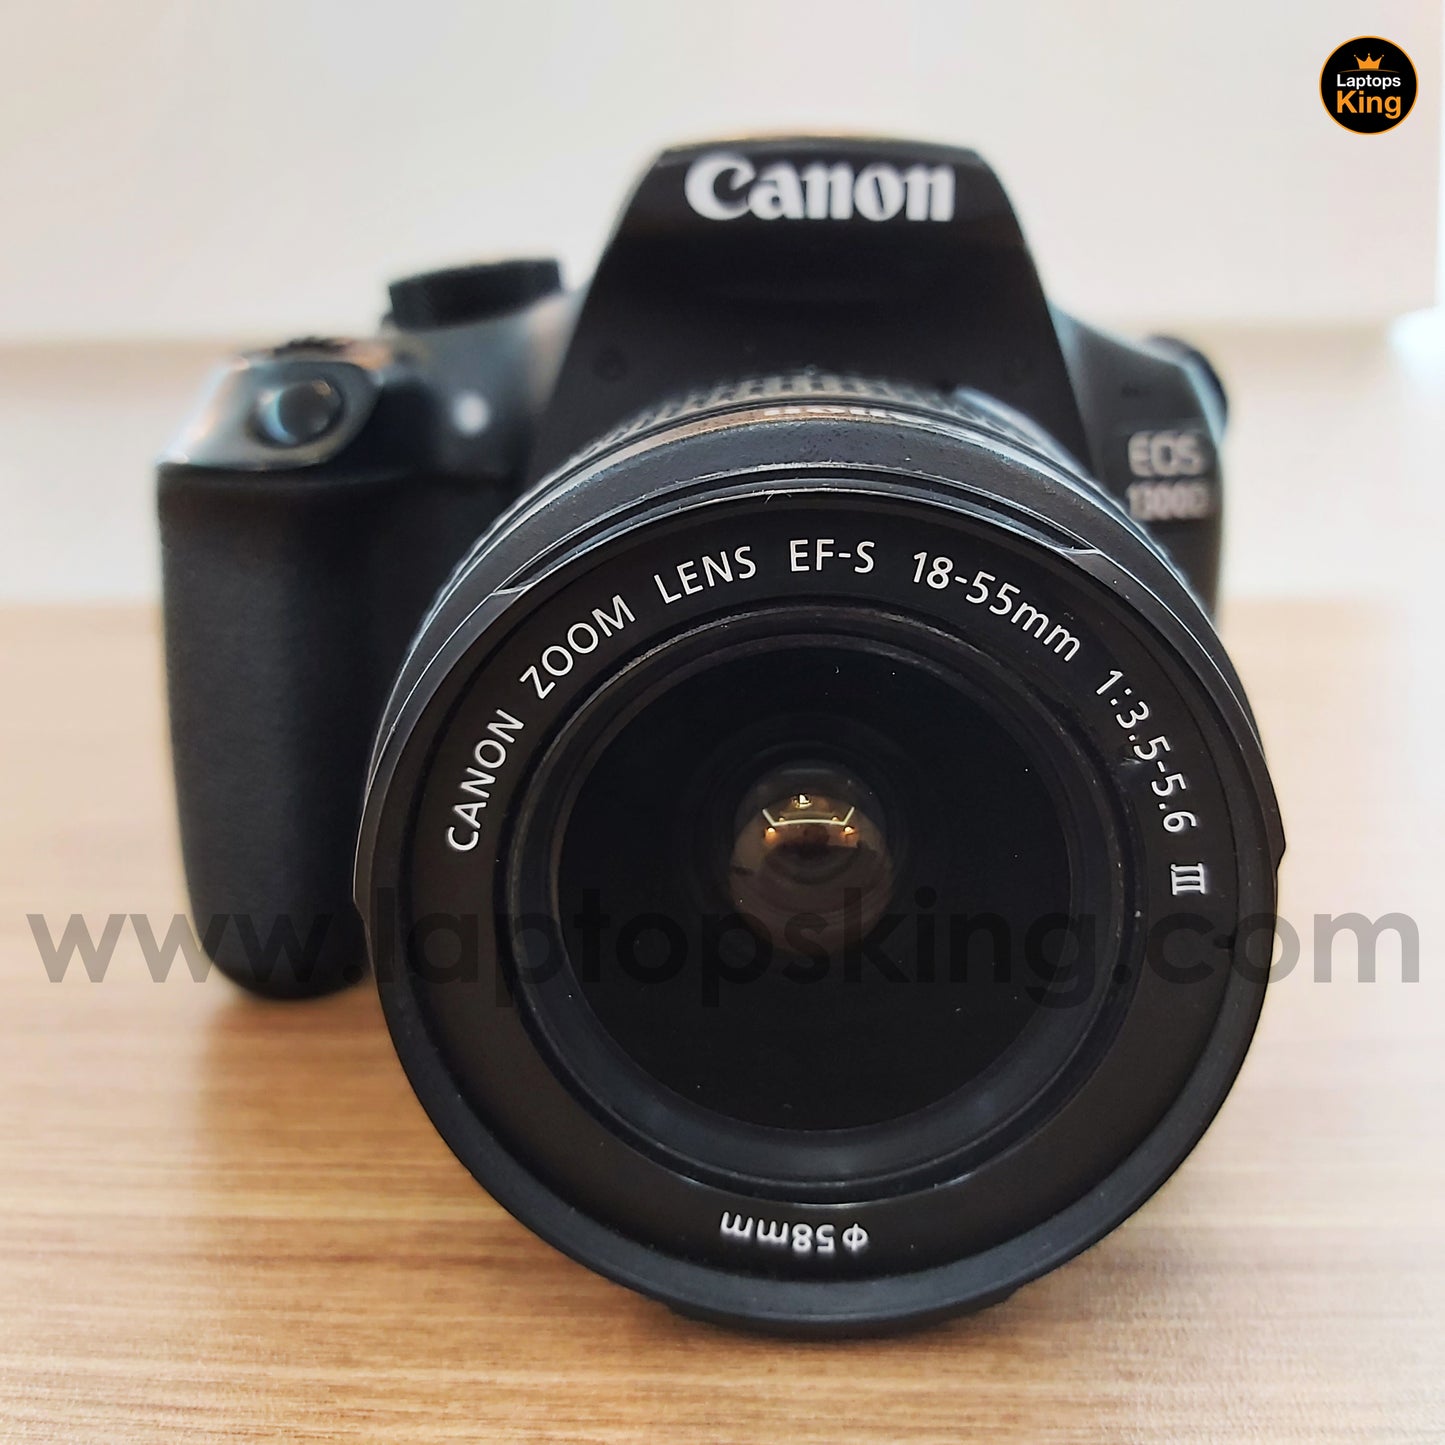 Canon Eos 1300d Digital Camera (Used Very Clean)